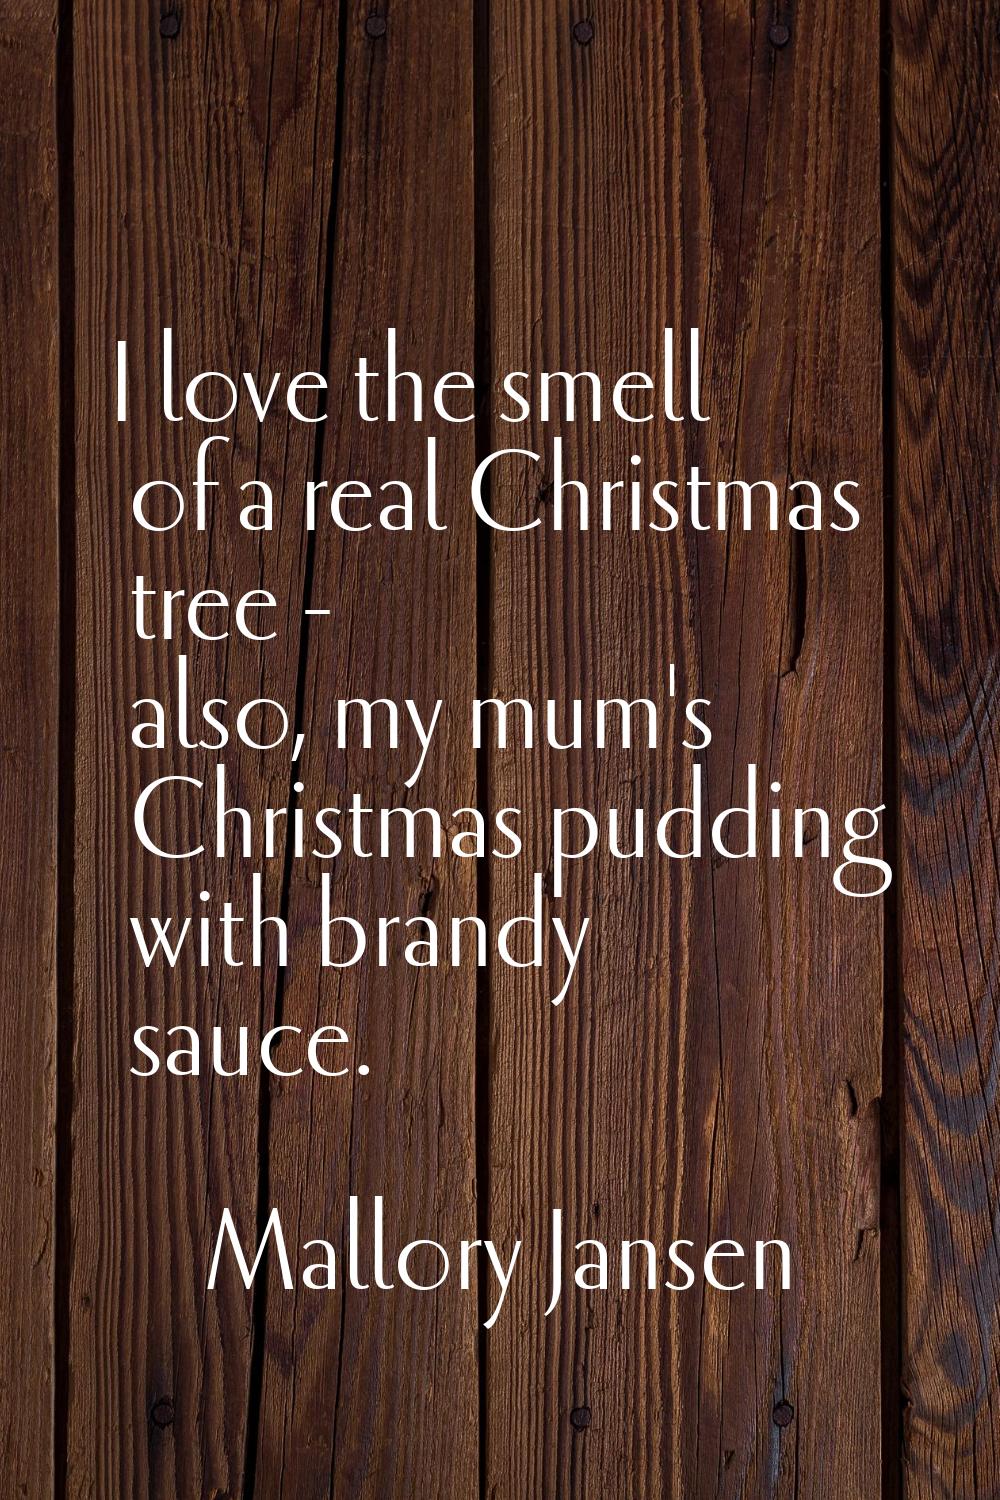 I love the smell of a real Christmas tree - also, my mum's Christmas pudding with brandy sauce.